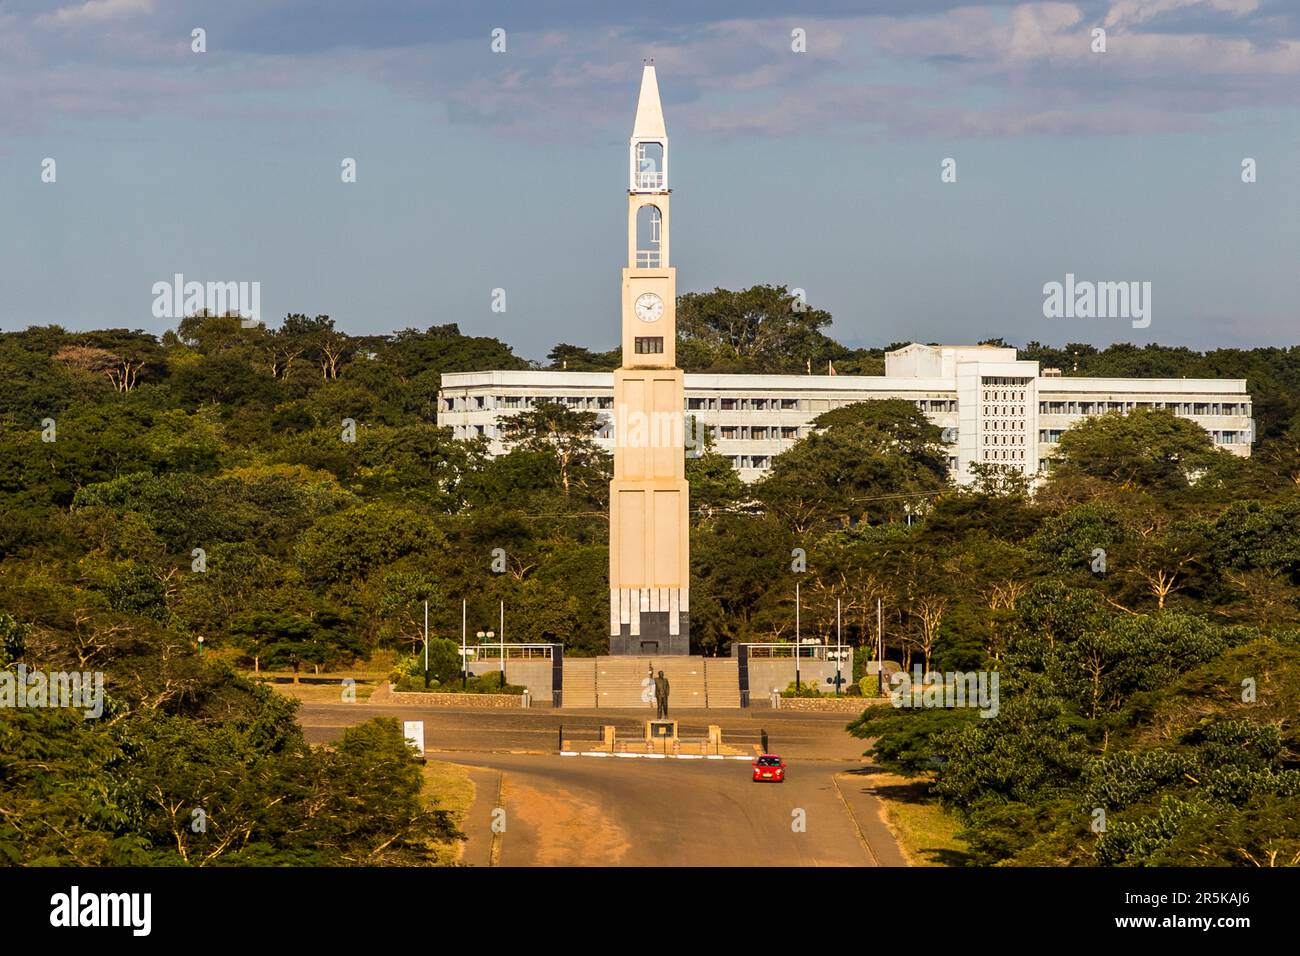 Memorial War Tower, Lilongwe. Memorial honoring all soldiers and civilians who died in World War I, World War II, and other military operations inside and outside Malawi. In front of it the statue of the first President of Malawi, Dr. Hastings Kamuzu Banda in Lilongwe, Malawi Stock Photo